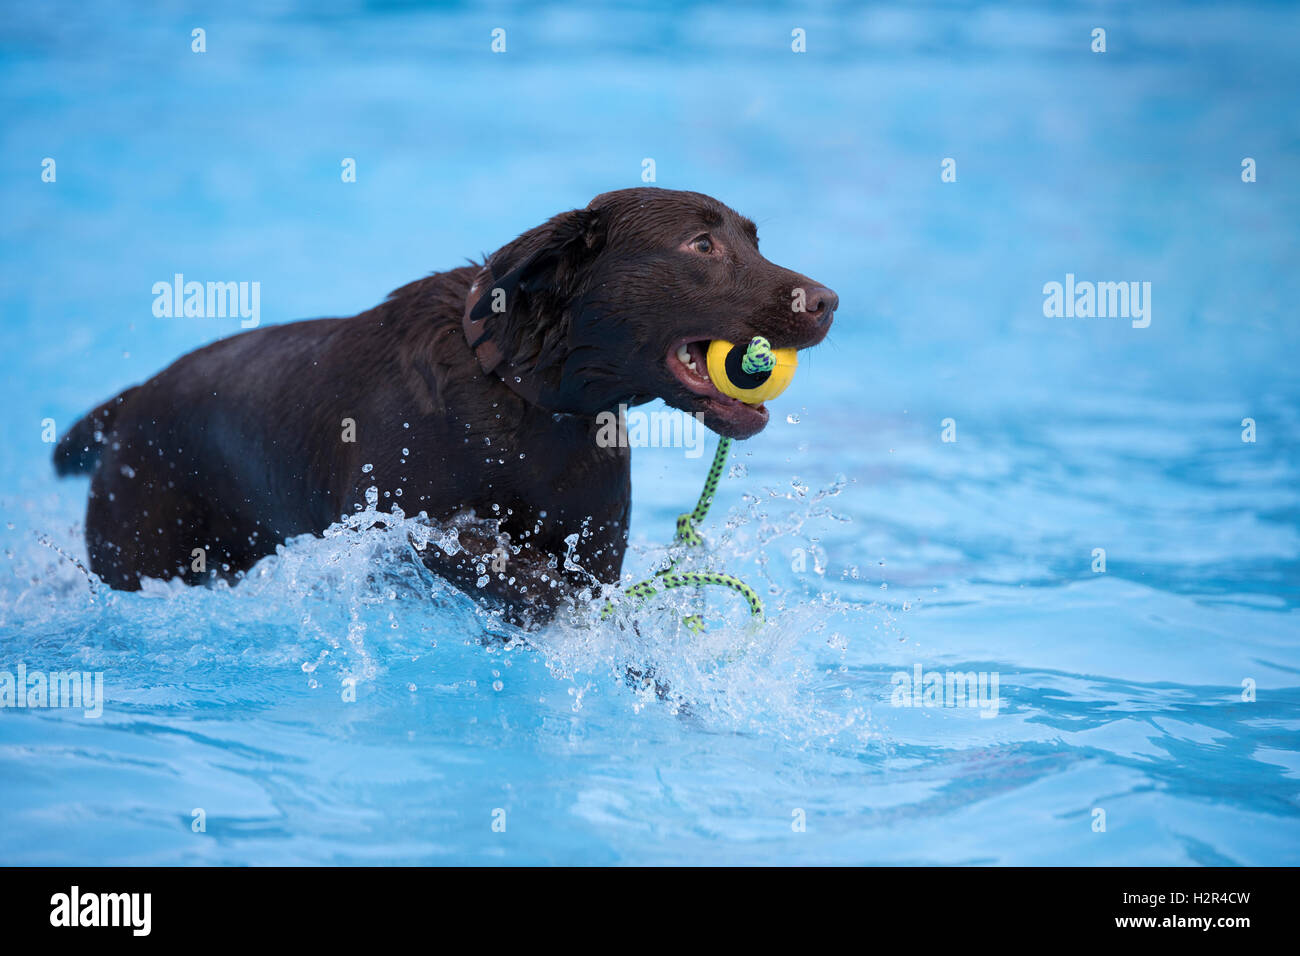 Dog, brown Labrador retriever, fetching yellow ball in swimming pool, blue water Stock Photo